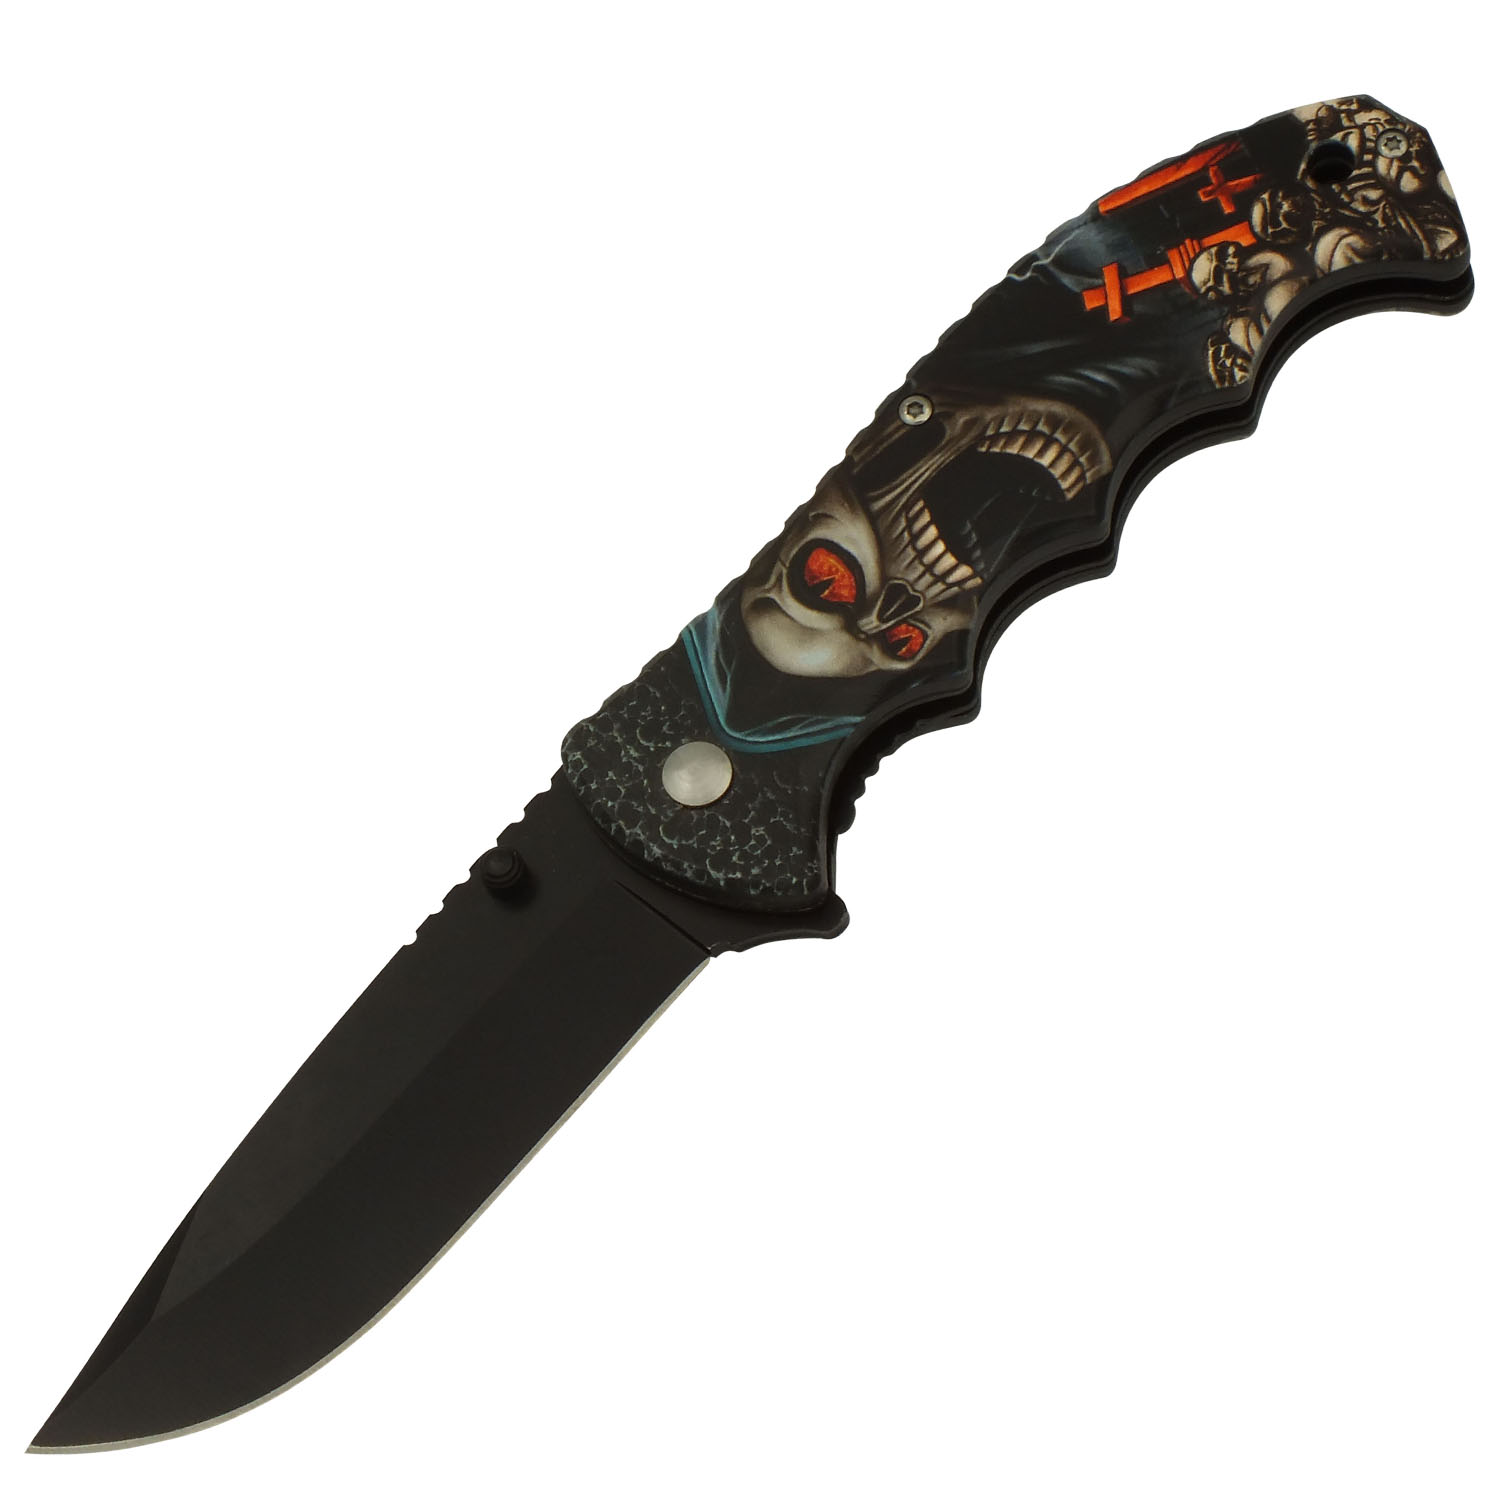 Reaper's Advent Spring Assisted Folding Pocket Knife